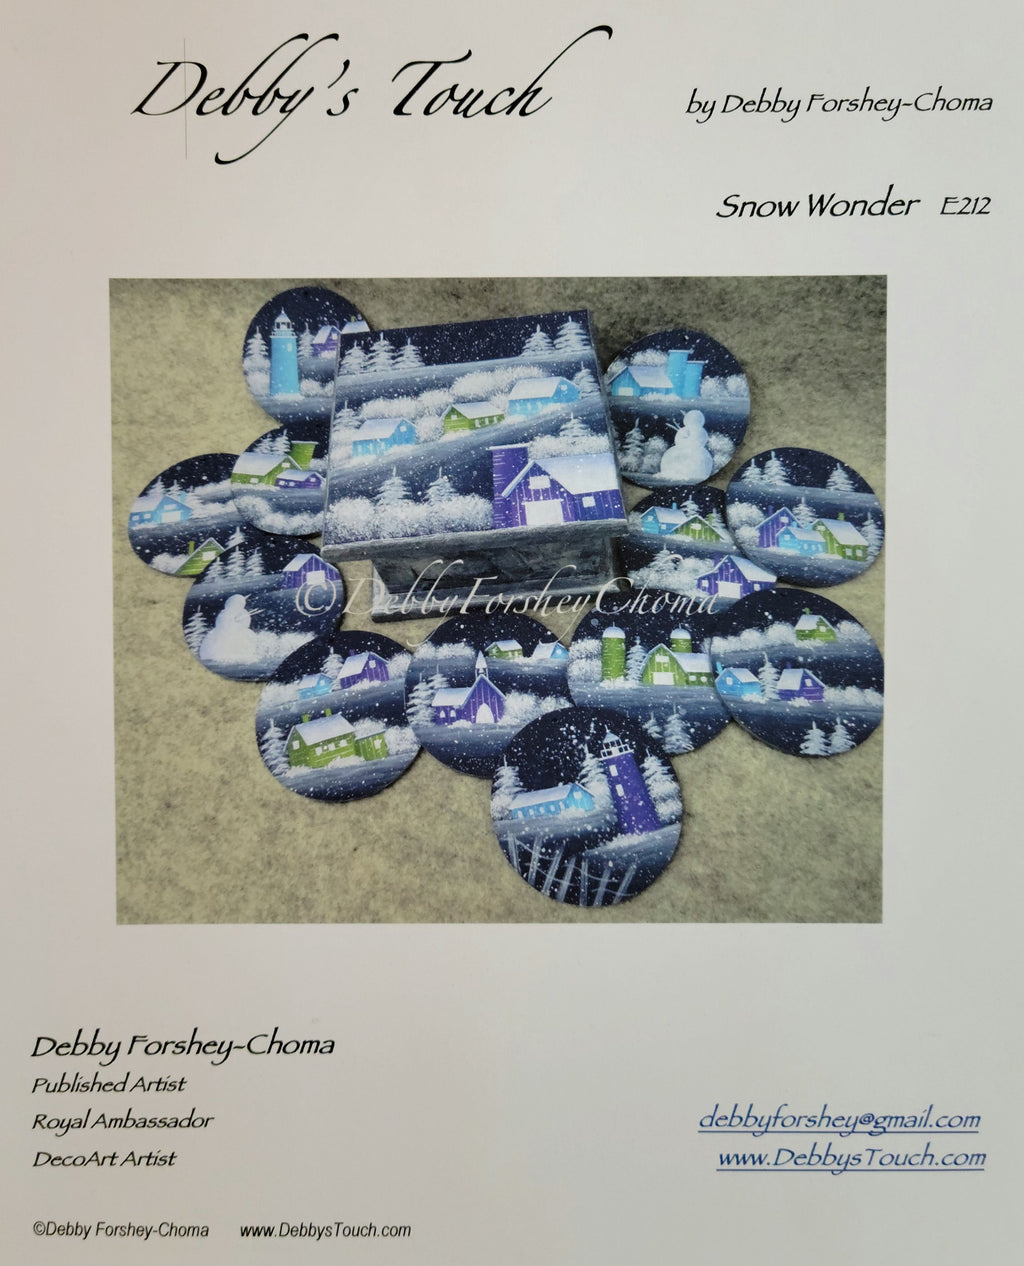 Snow Wonder Packet by Debby Forshey-Choma